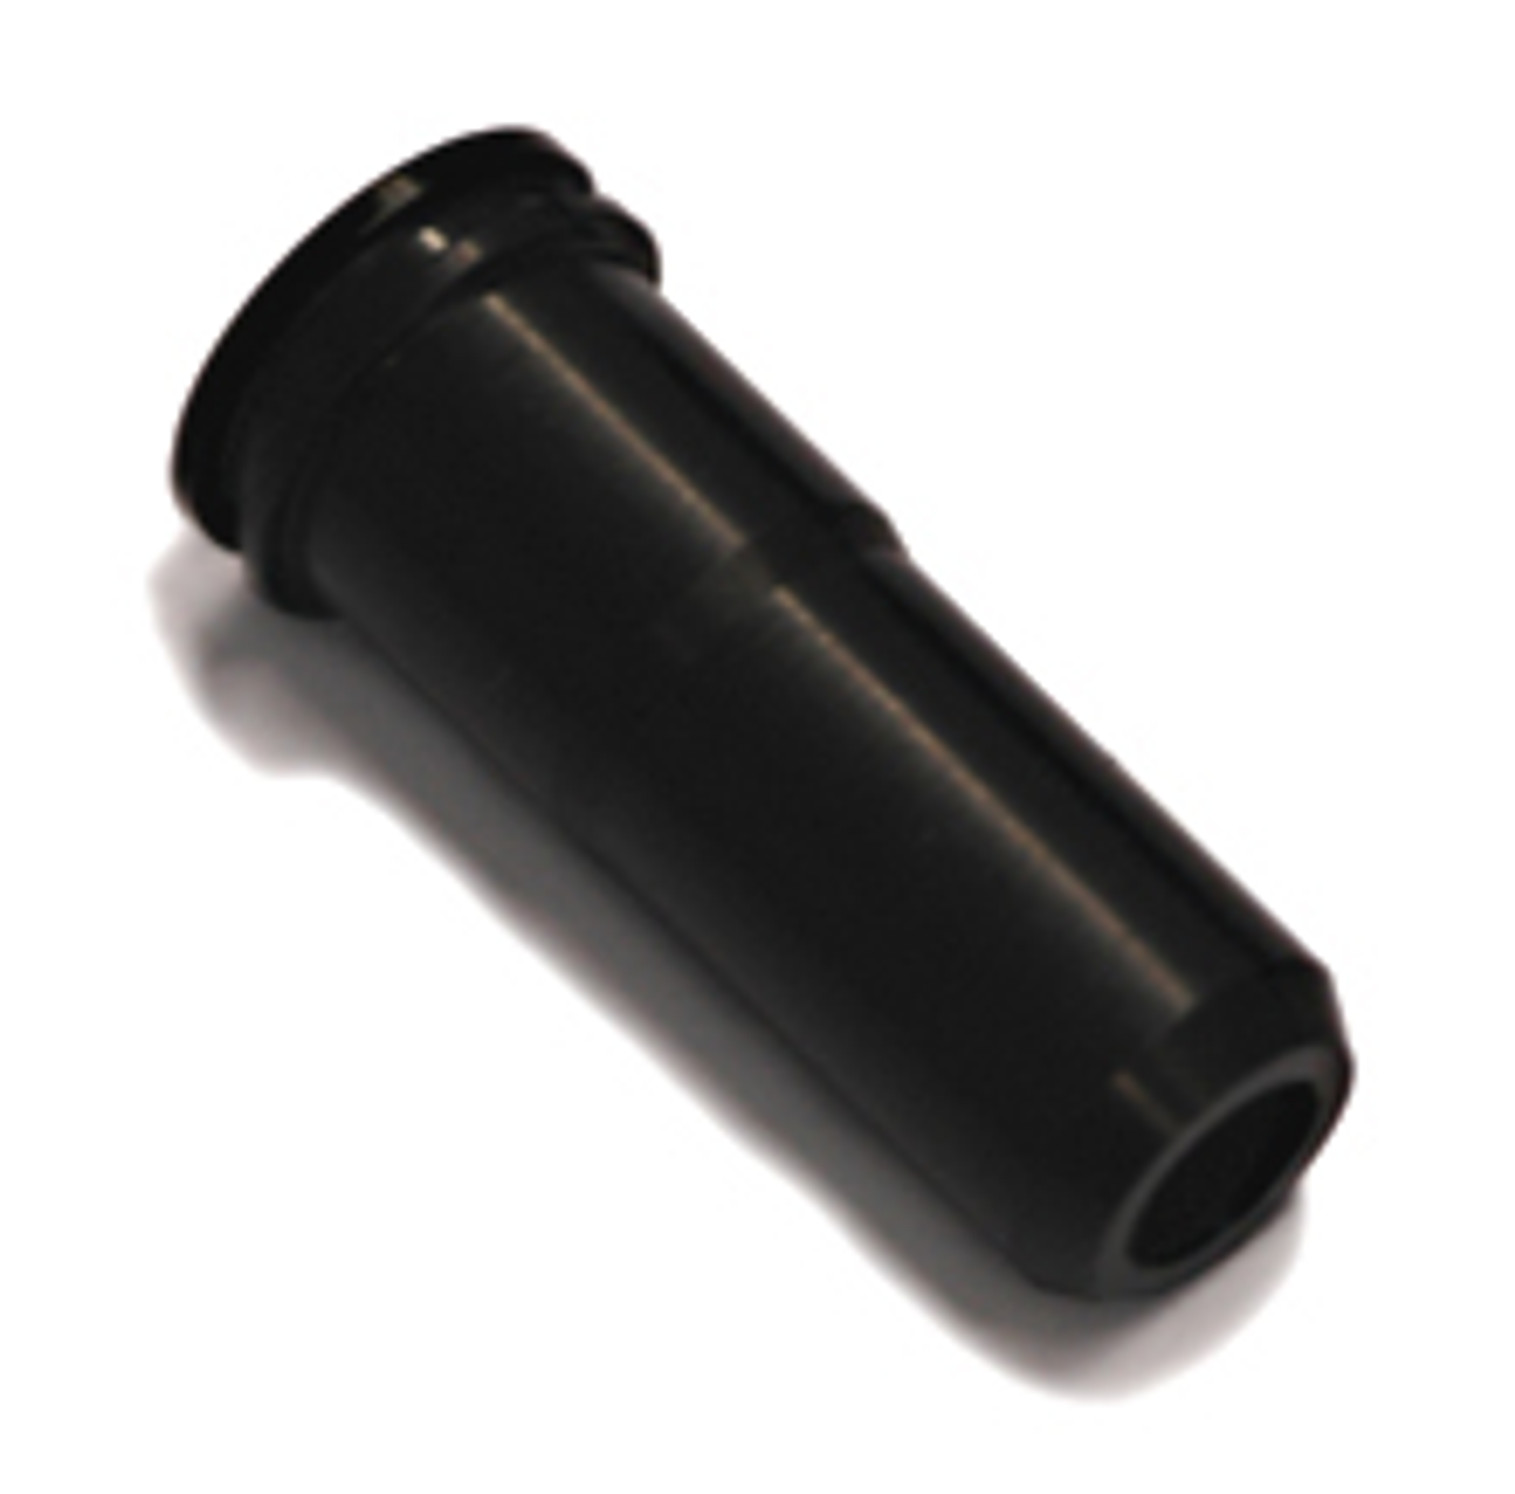 G&G Reinforced Air Nozzle for G&G / Army L85 Series Airsoft AEG